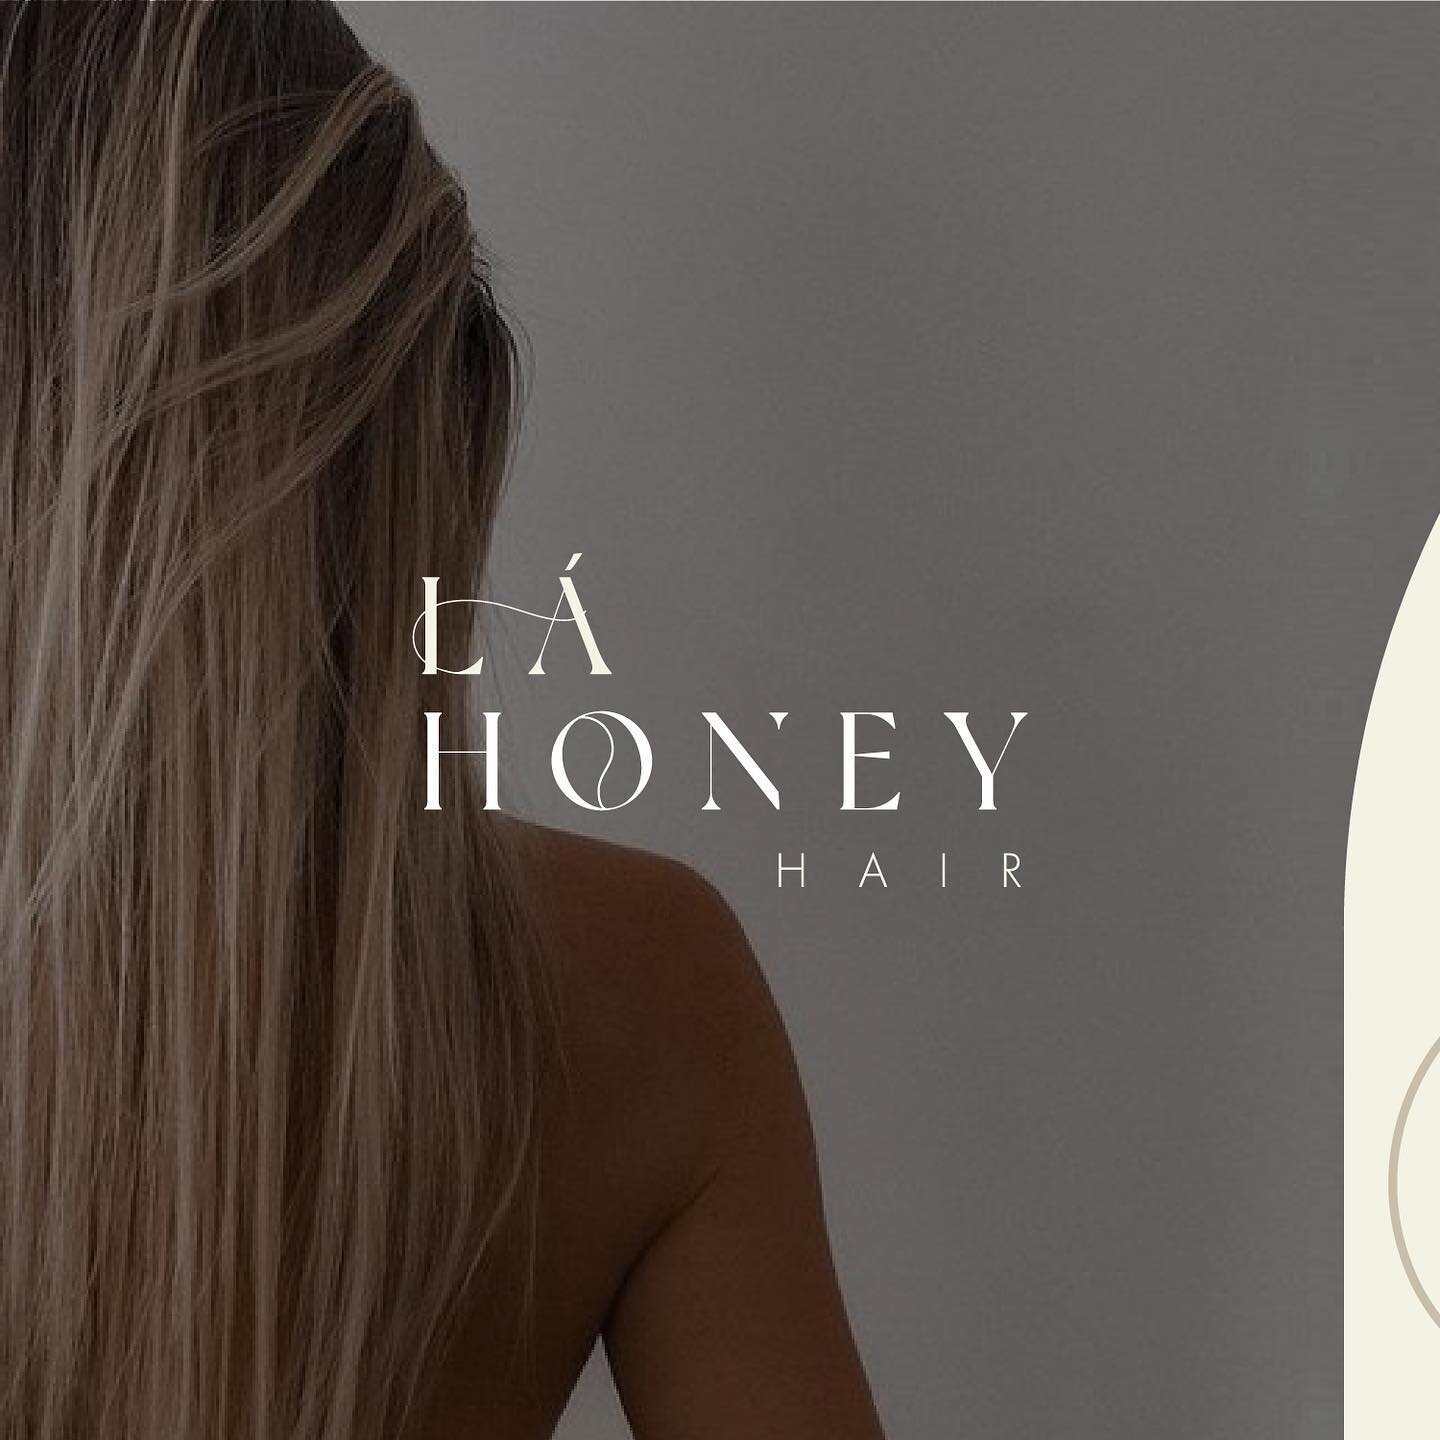 Such a beautiful new look created for @lahoneyhair to suit their new aesthetic feel. 

Logo variations is the perfect way of providing your brand with flexibility and consistency that promote your brand in different forms while sending a cohesive mes